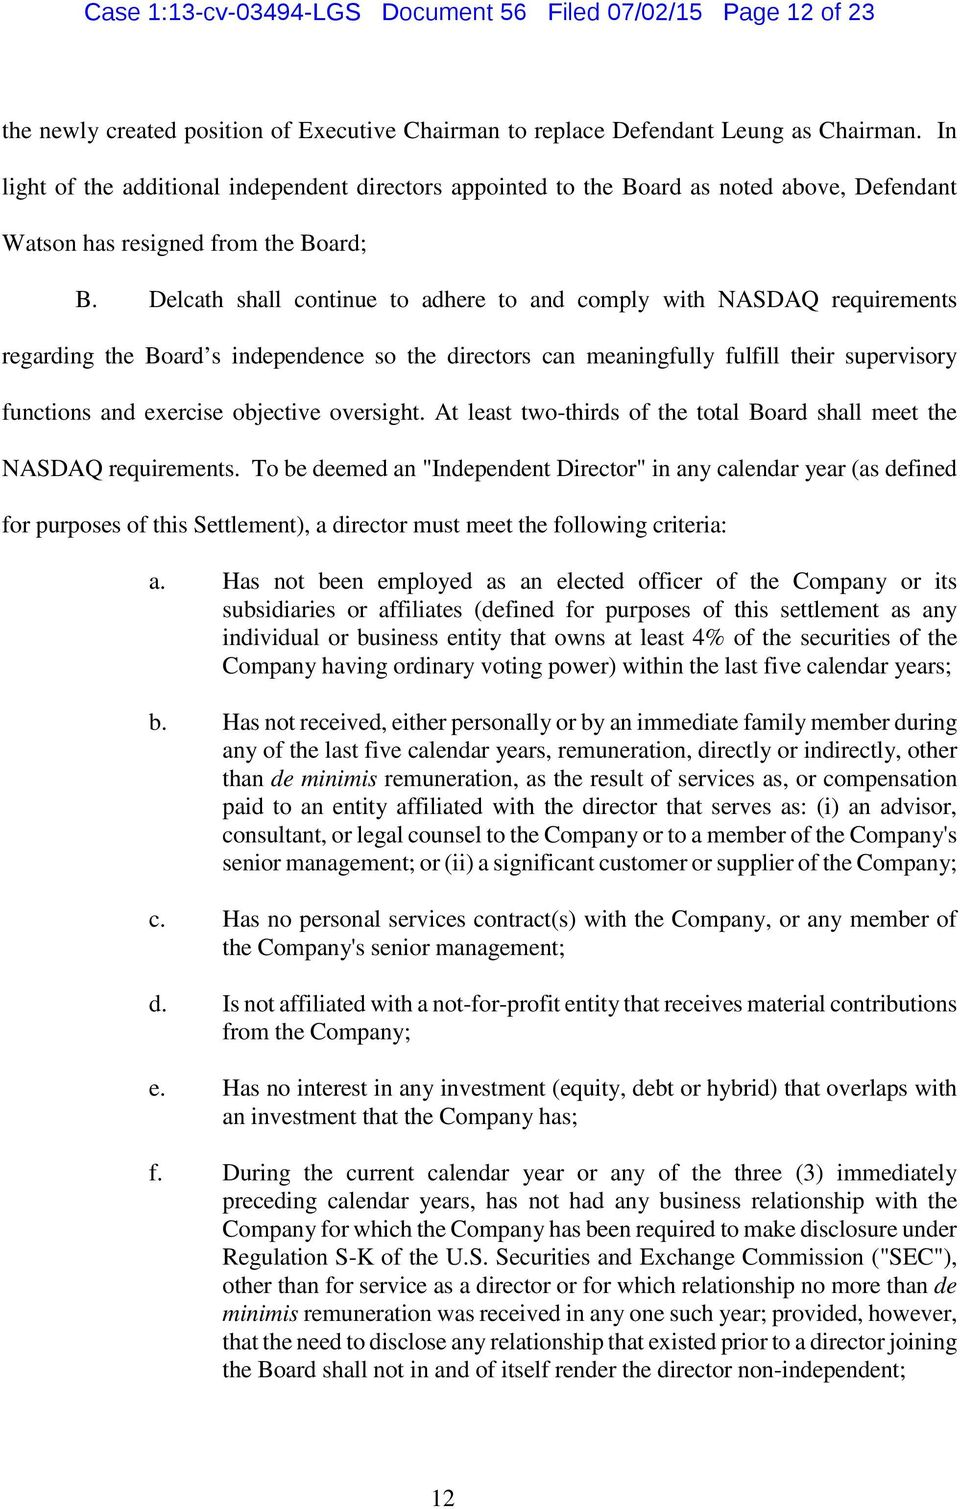 Delcath shall continue to adhere to and comply with NASDAQ requirements regarding the Board s independence so the directors can meaningfully fulfill their supervisory functions and exercise objective